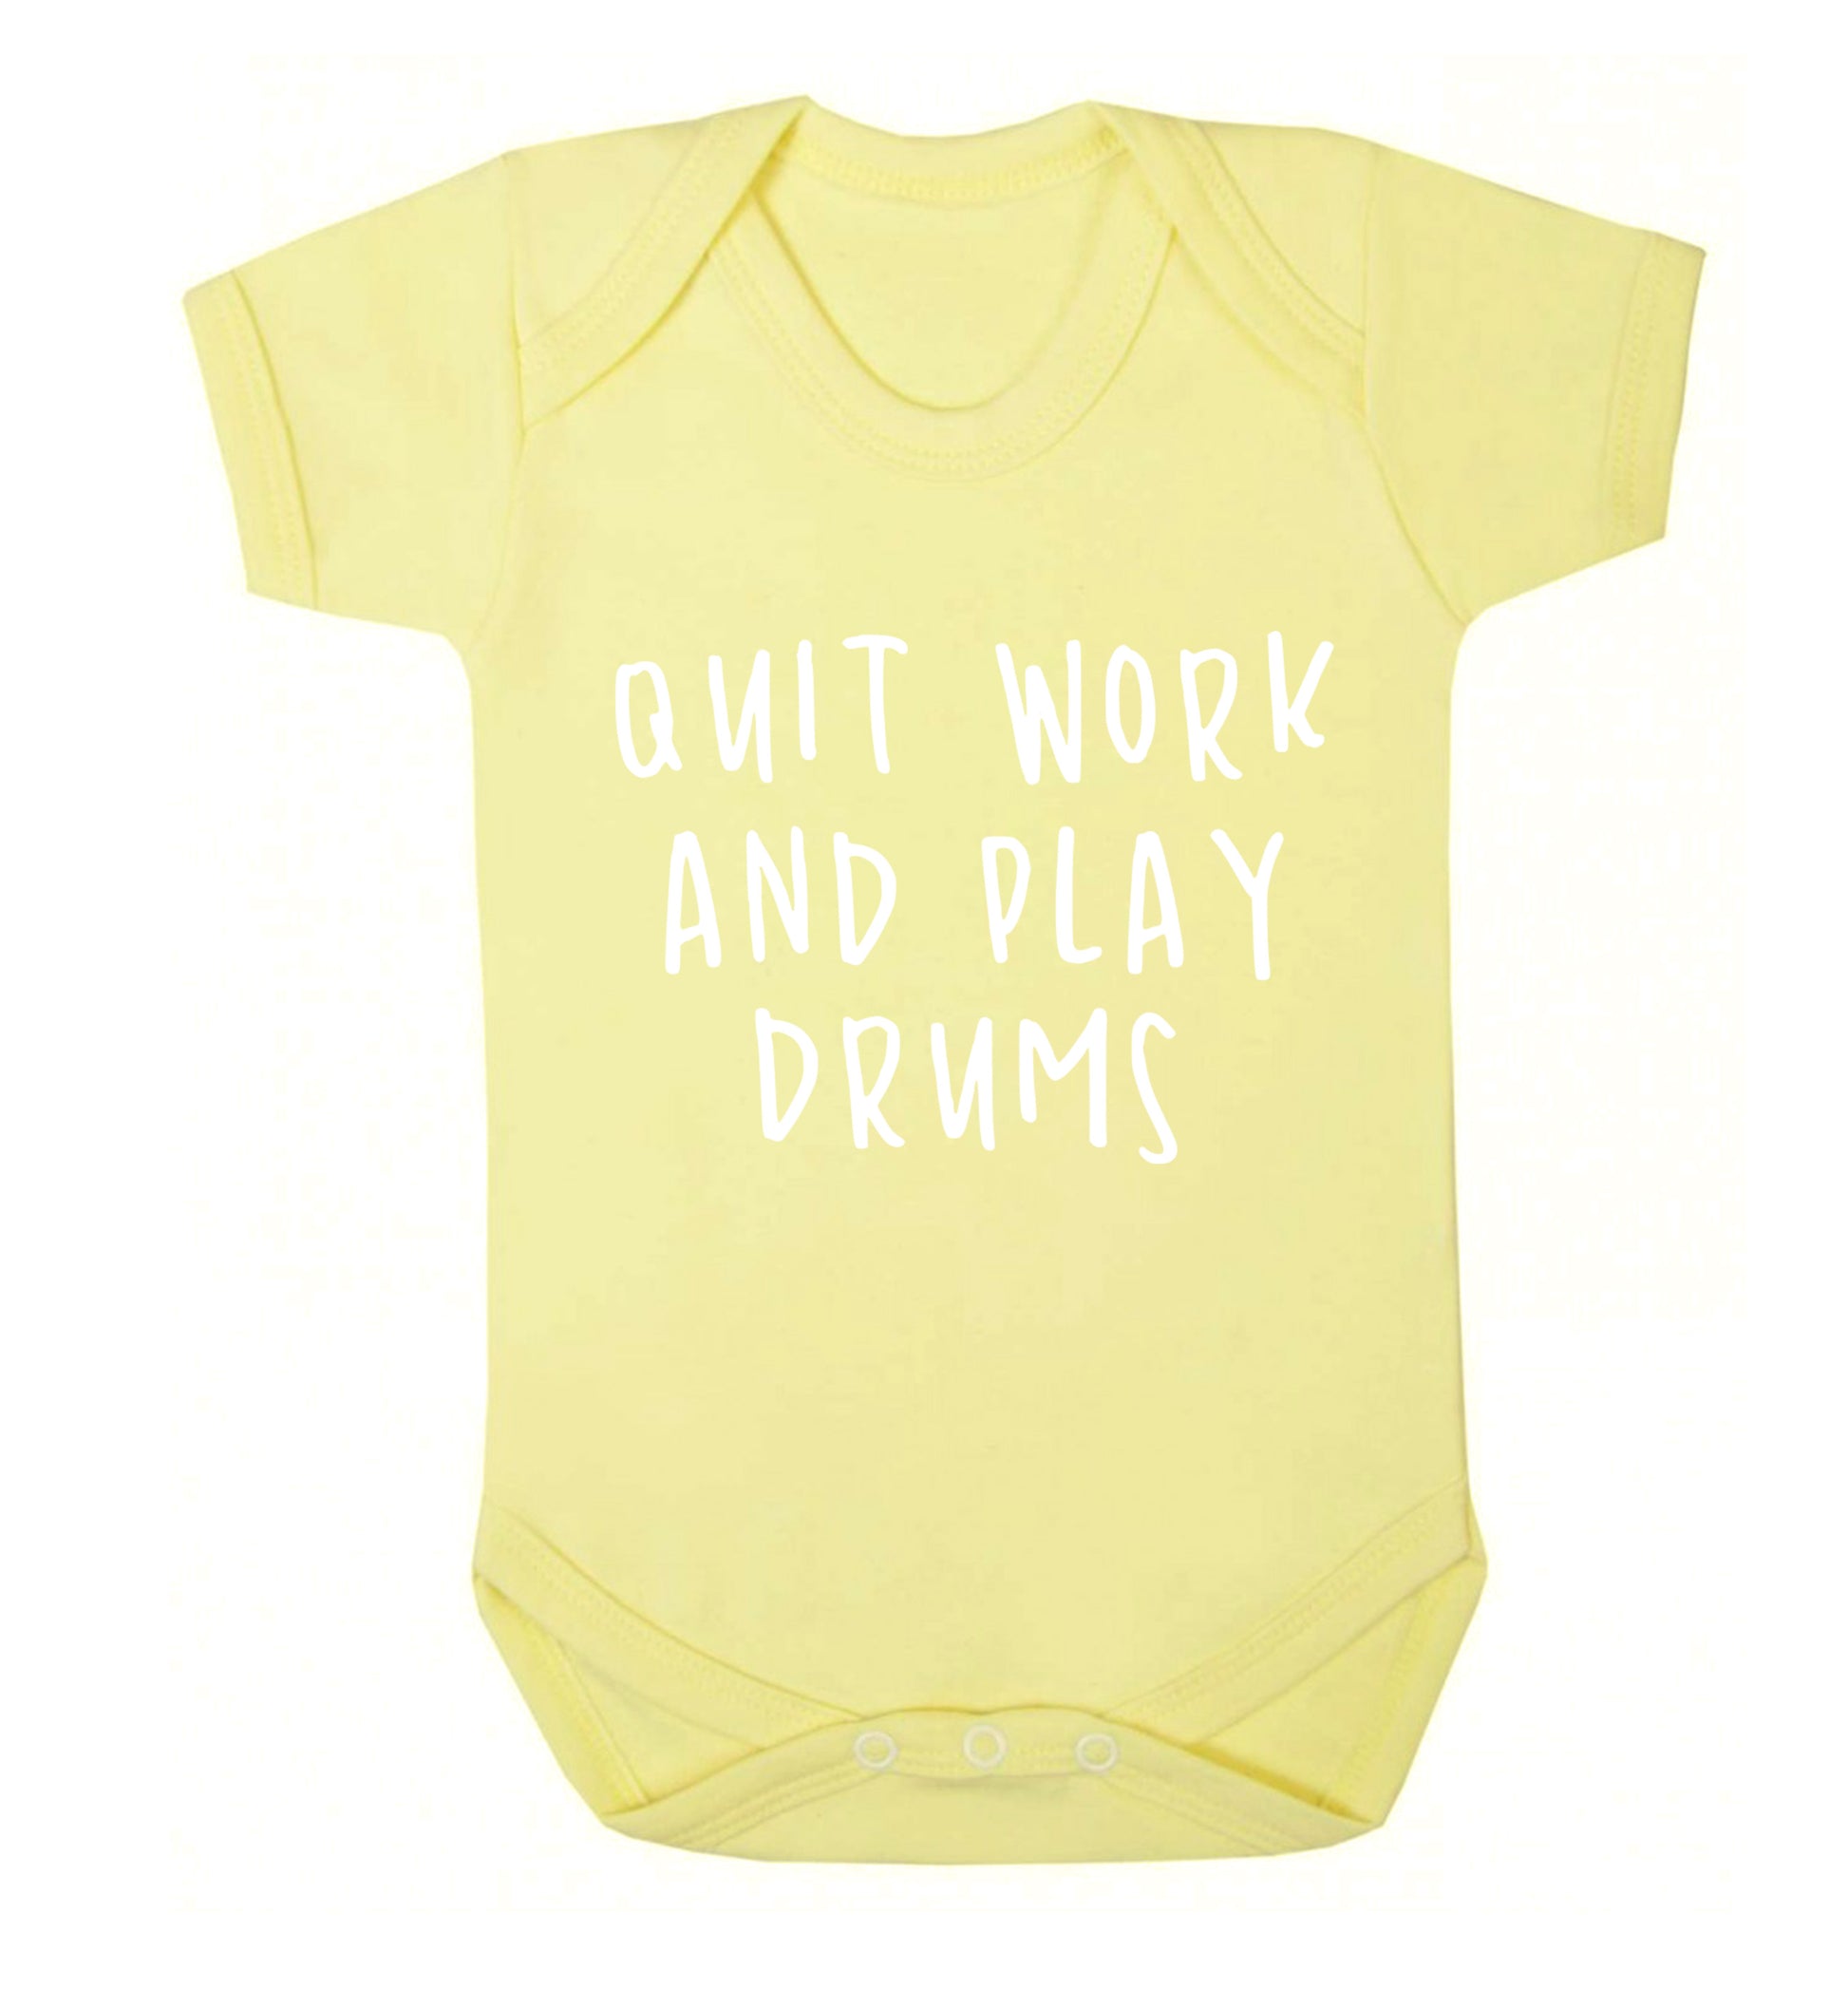 Quit work and play drums Baby Vest pale yellow 18-24 months